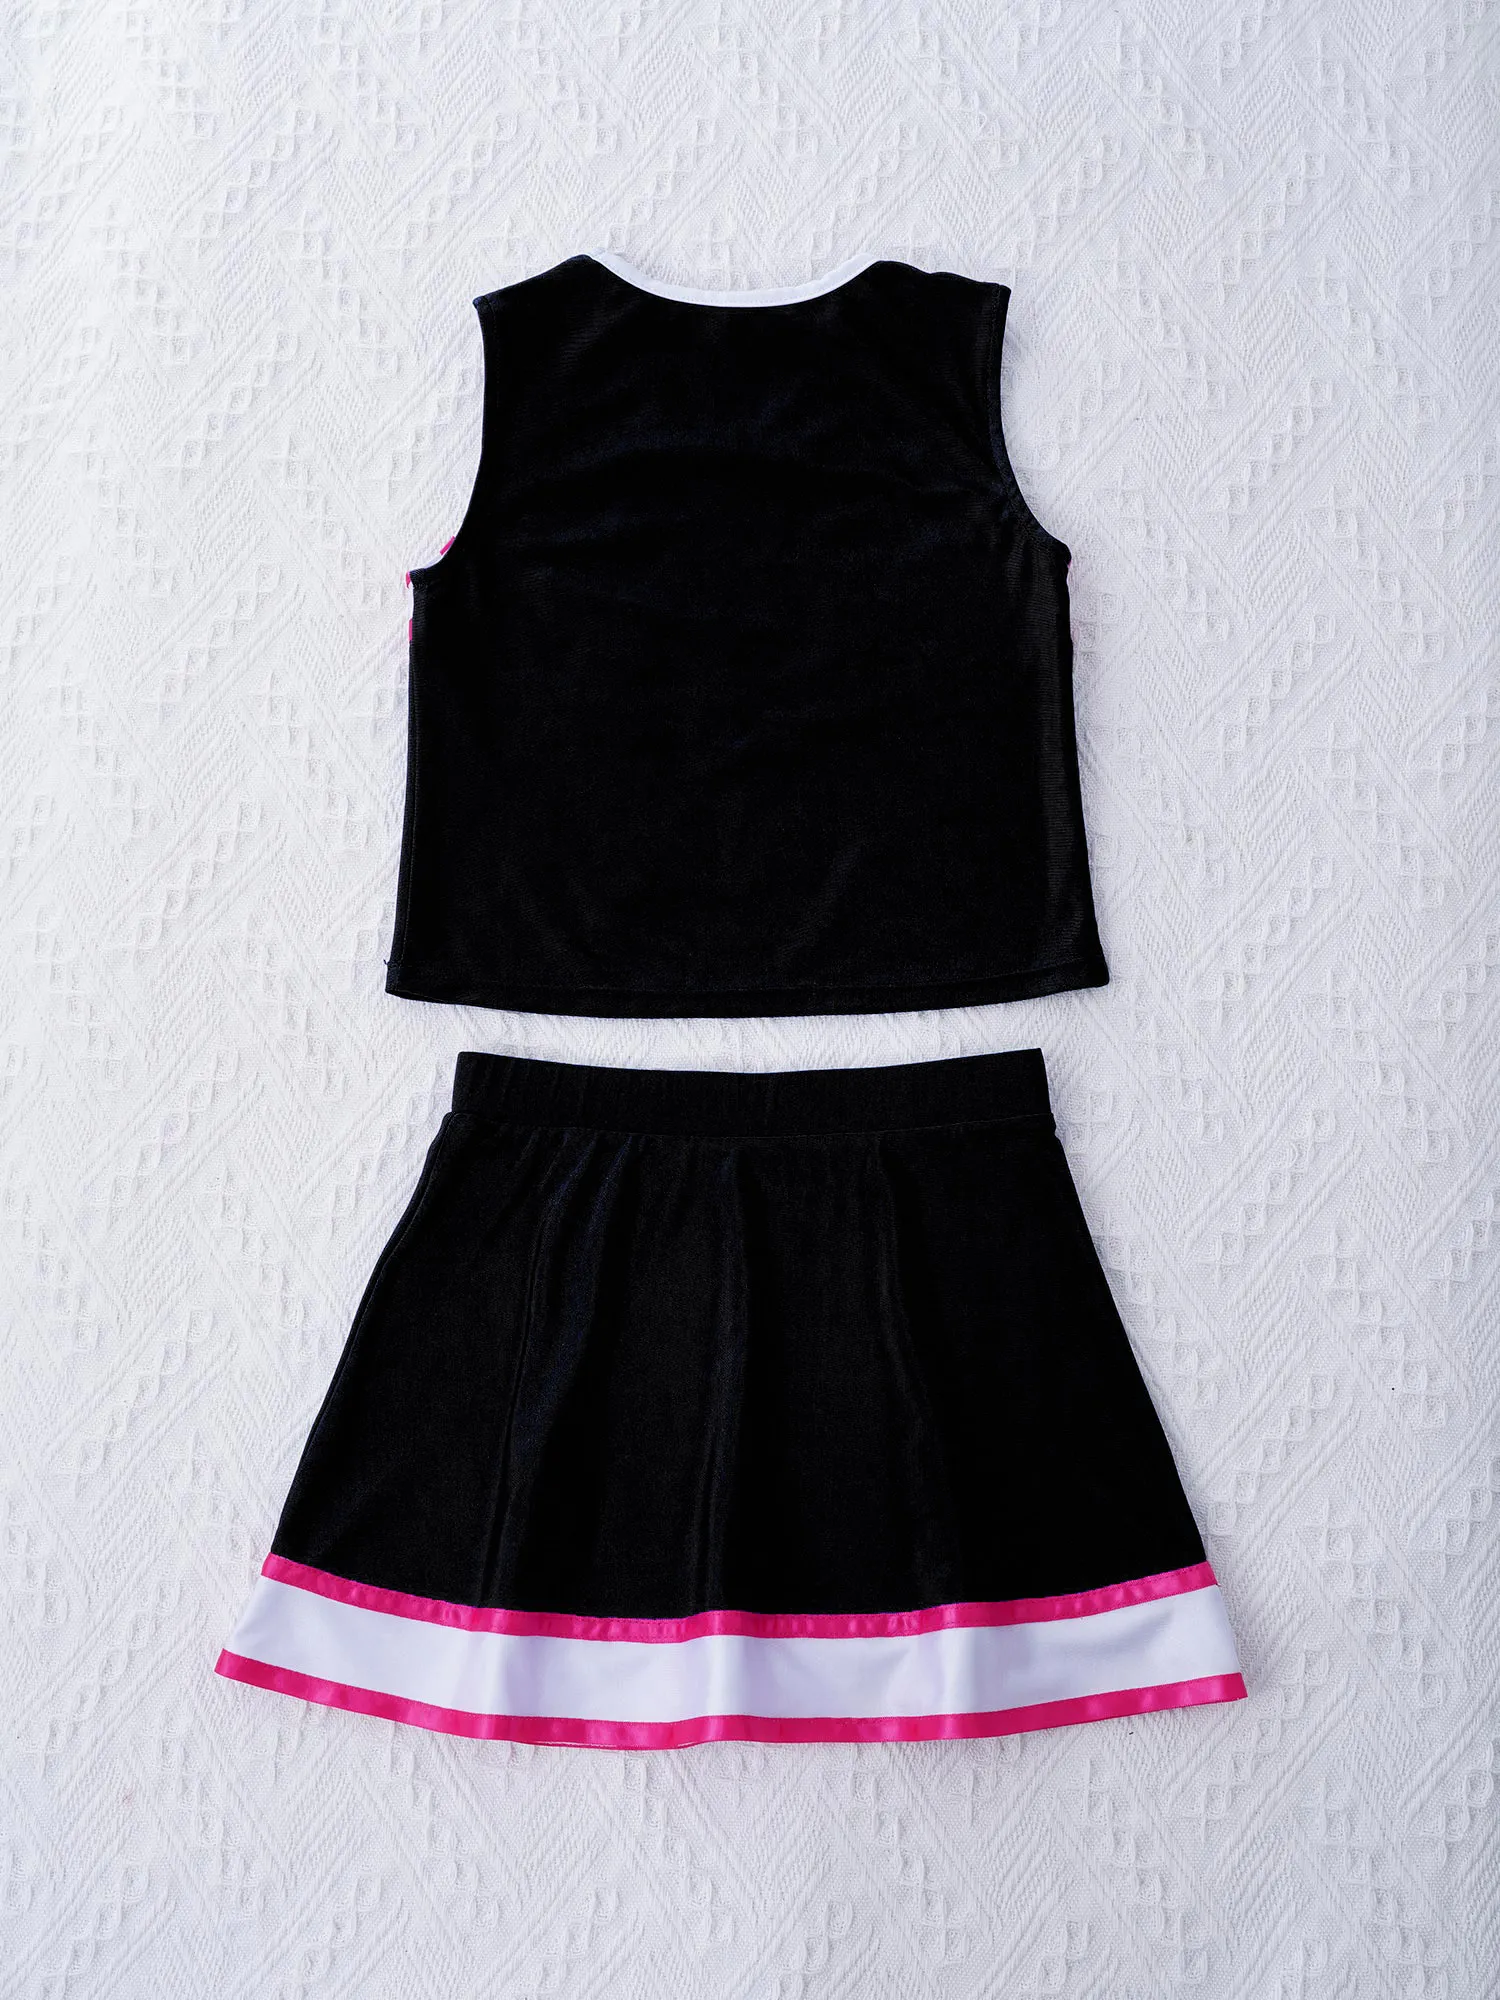 children's clothing sets expensive Kids Girls Cheer Leader Cheerleading Costumes Outfit Uniform Cheer Up Encourage Dance Dress Children Stage Performance Clothes pajamas for baby girl